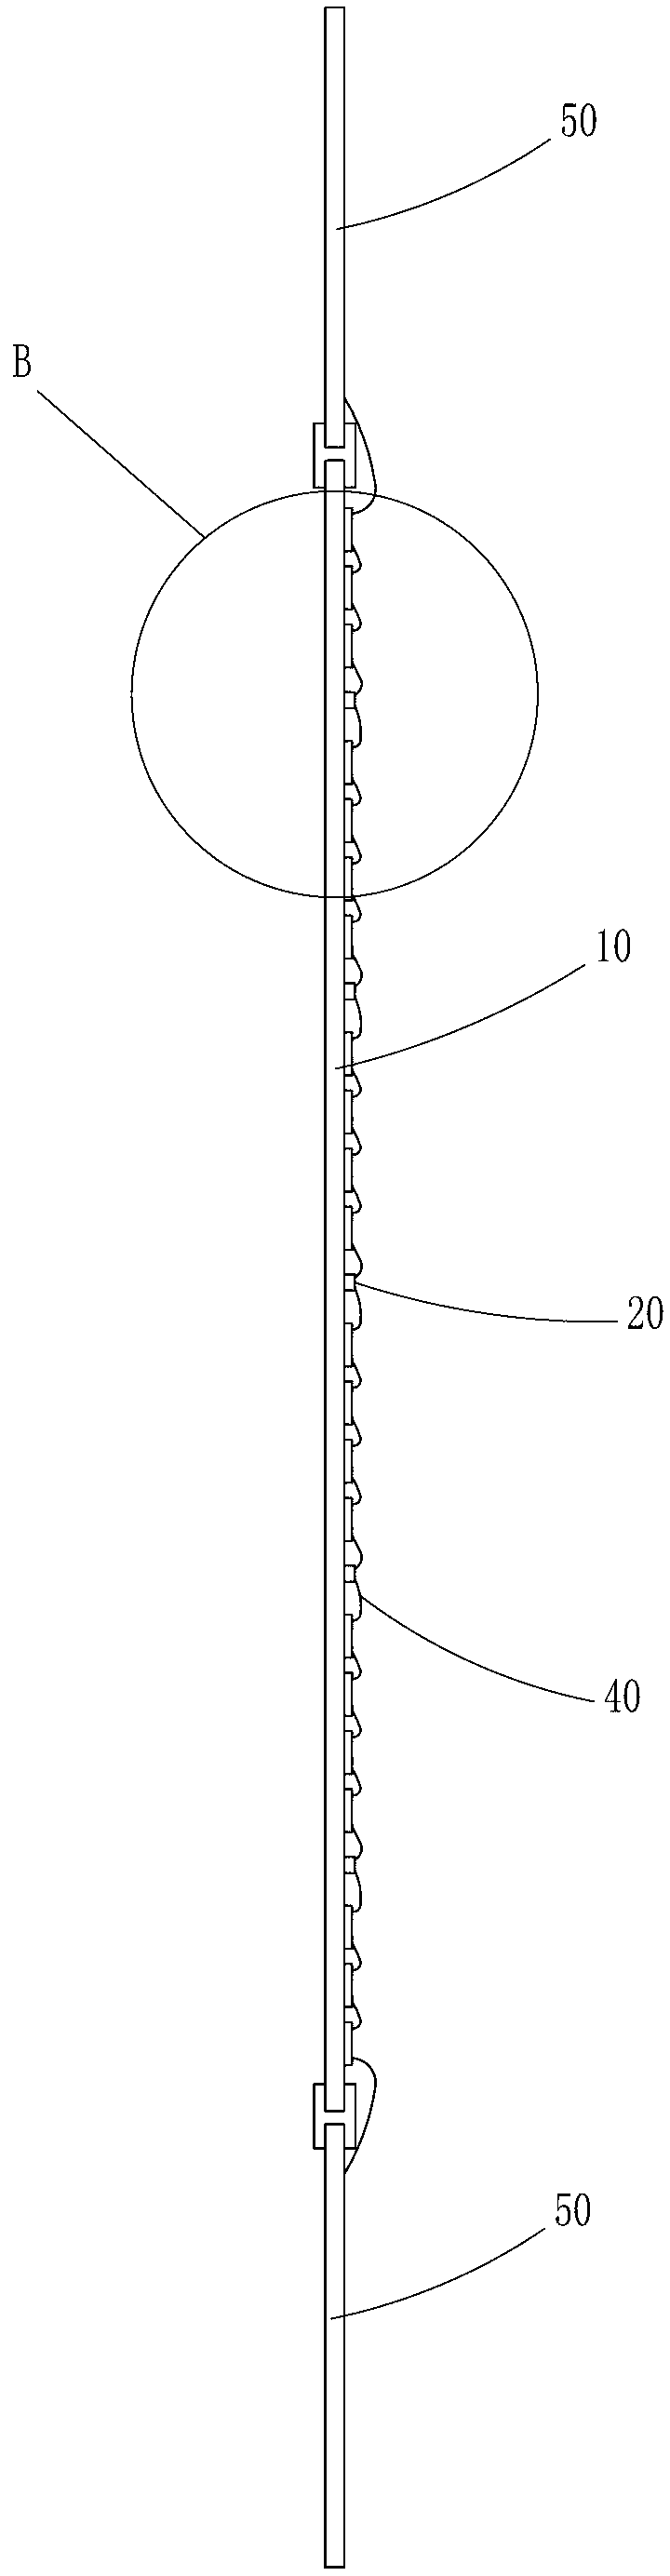 LED (light-emitting diode) lamp and filament thereof